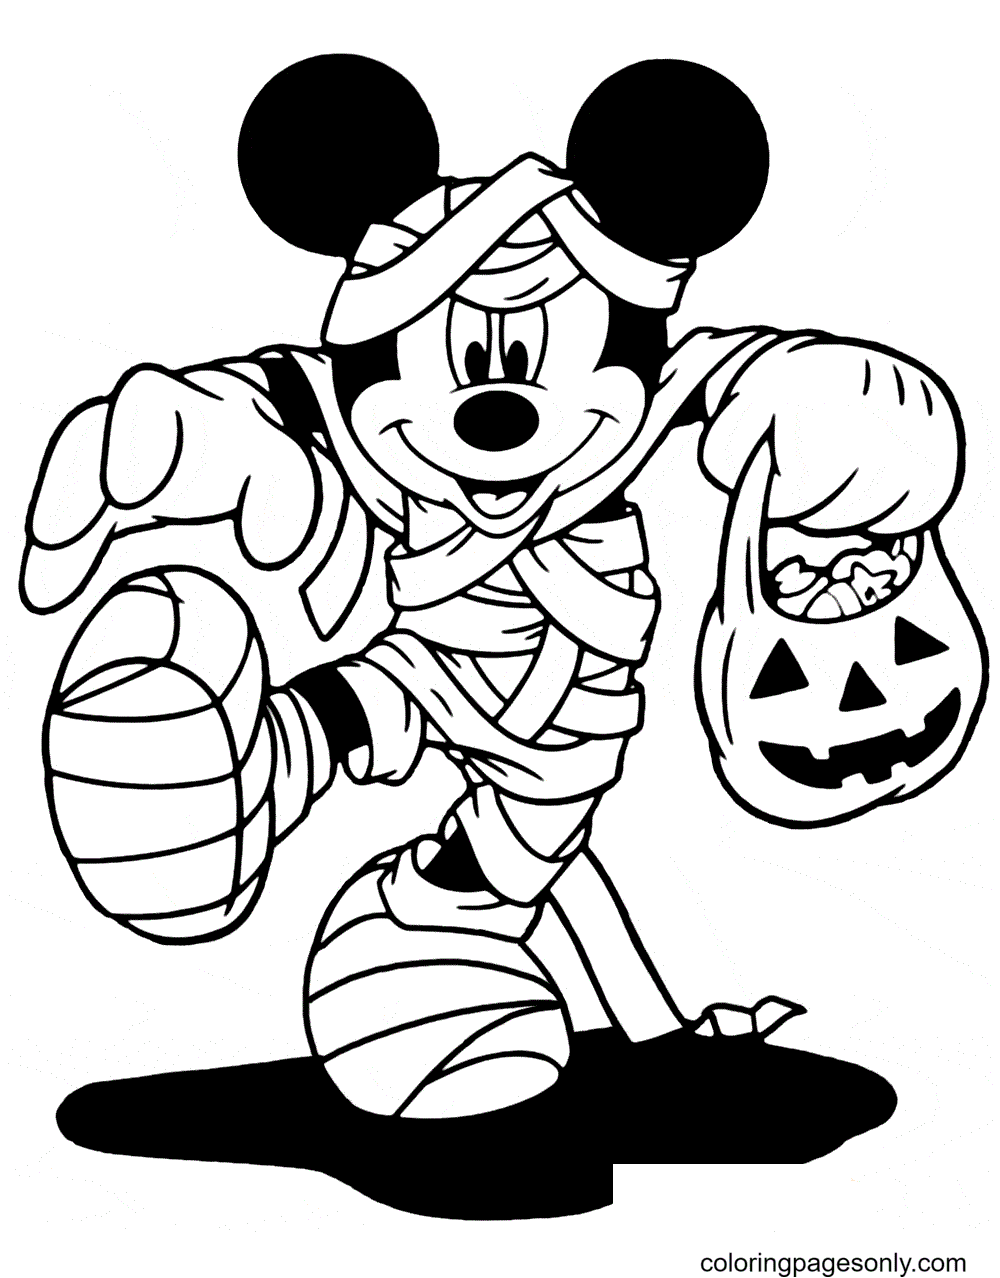 Mummy Mickey on Hallween Coloring Page